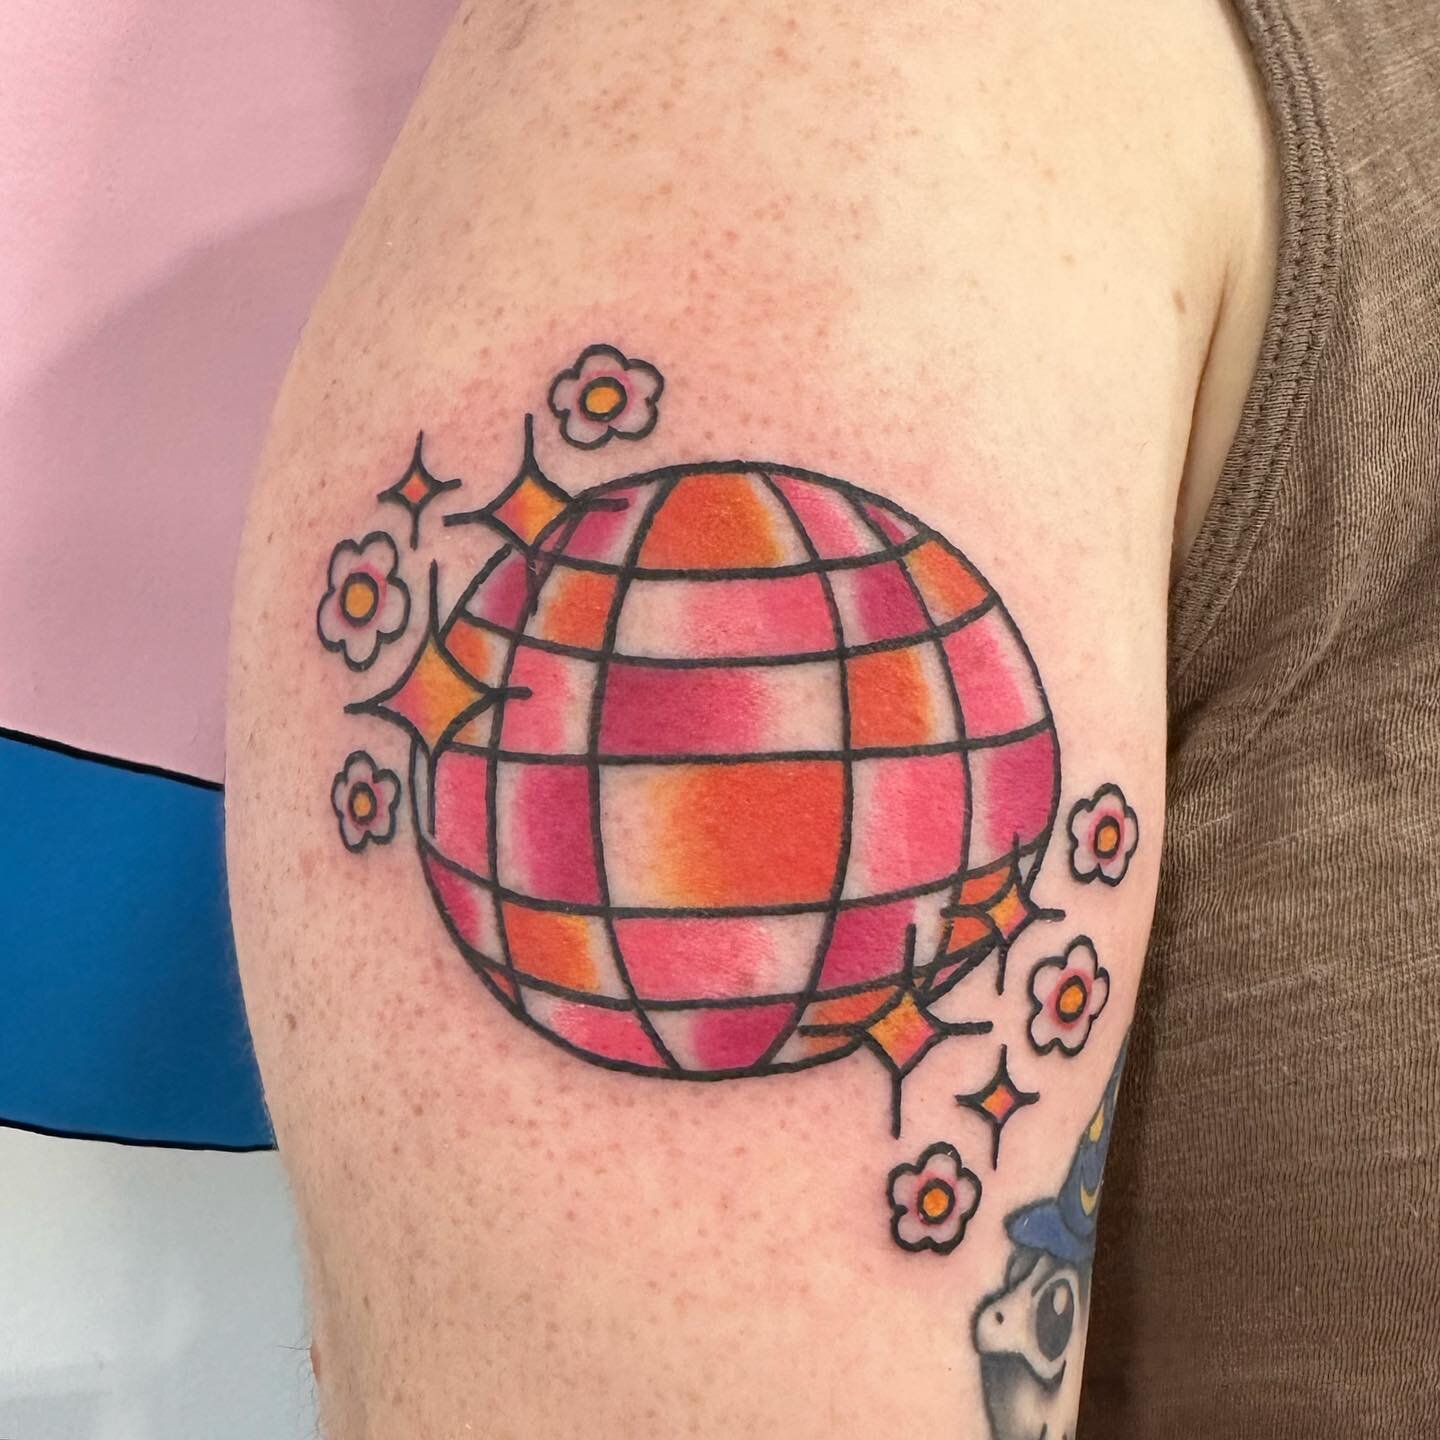 🪩DiscoBall🪩 for the lovely @aubreynstjohn! Thank you so much for the continued trust, good seeing you! #discotattoo #discoball #tattoo #tattoos #kankakee #kankakeecounty #kankakeetattoo #bradleyil